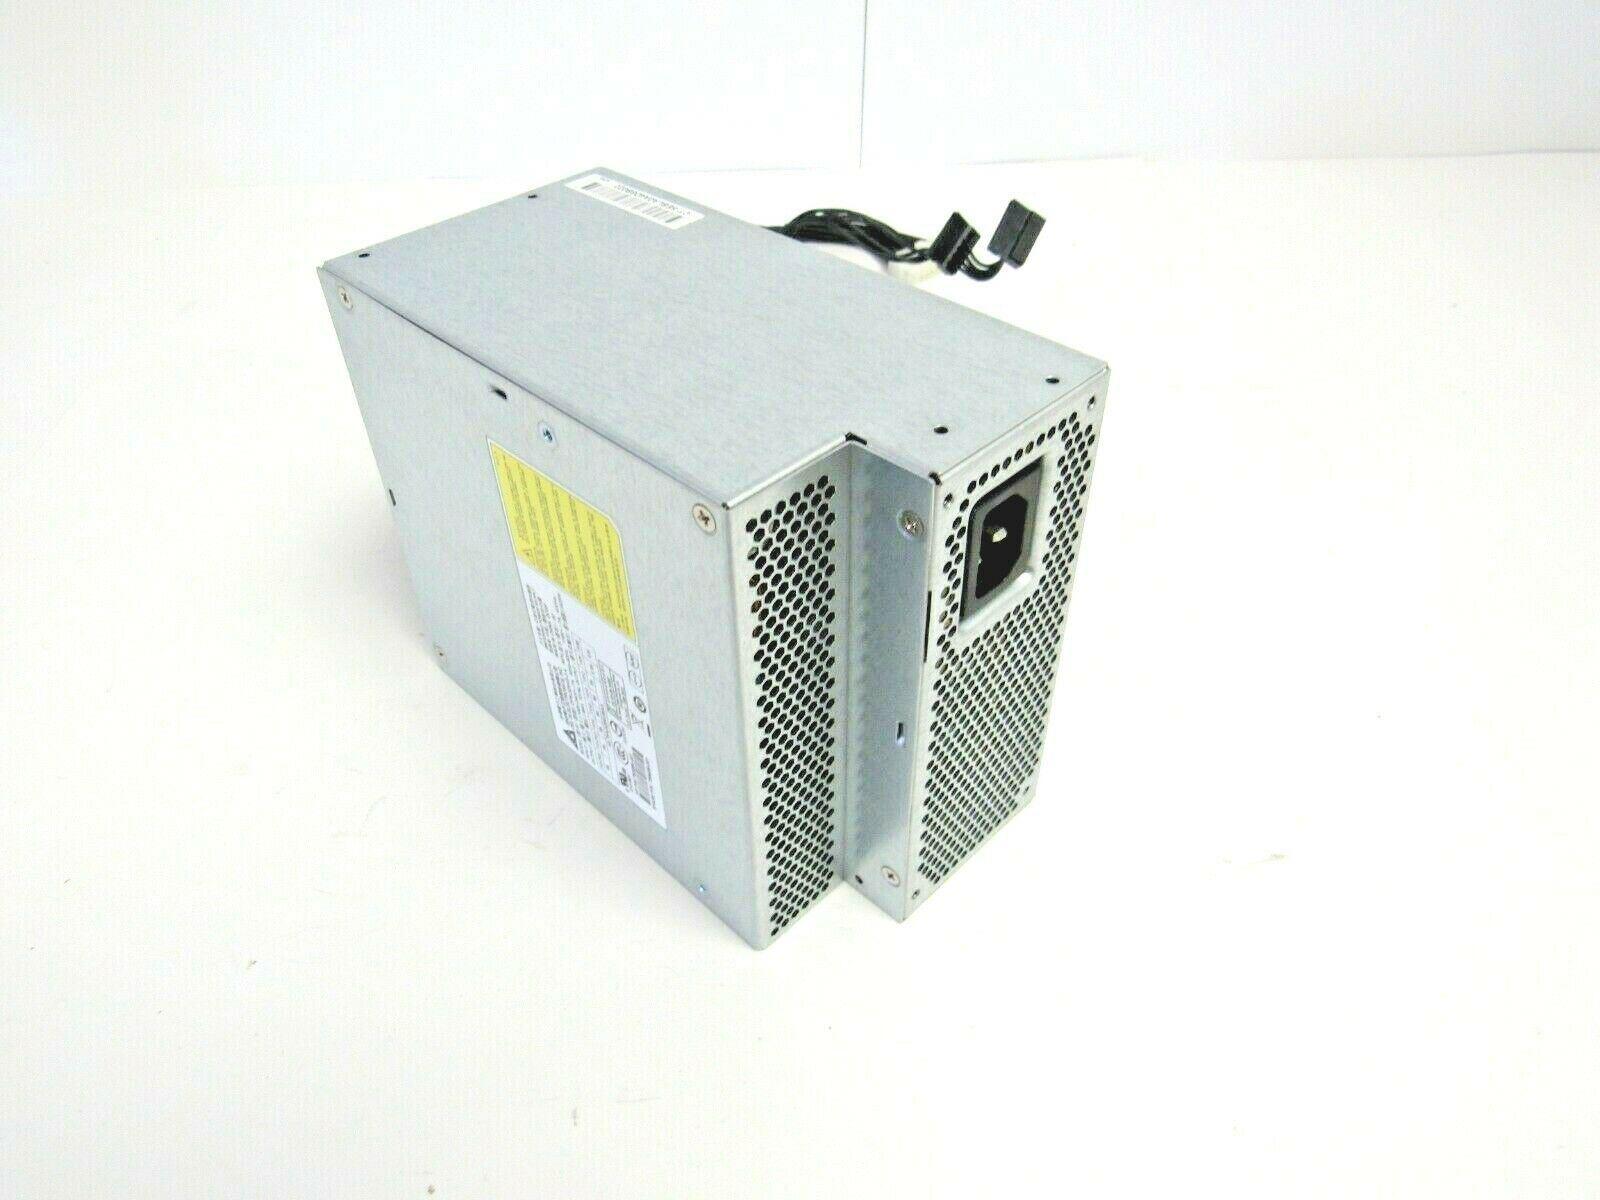 DPS 525AB 3 753084 001 758466 001 power supply rated at 525 watts 85 efficient rating specifications include wide ranging active power factor correction pfc energy star qualified configuration dependent 100 240 vac input